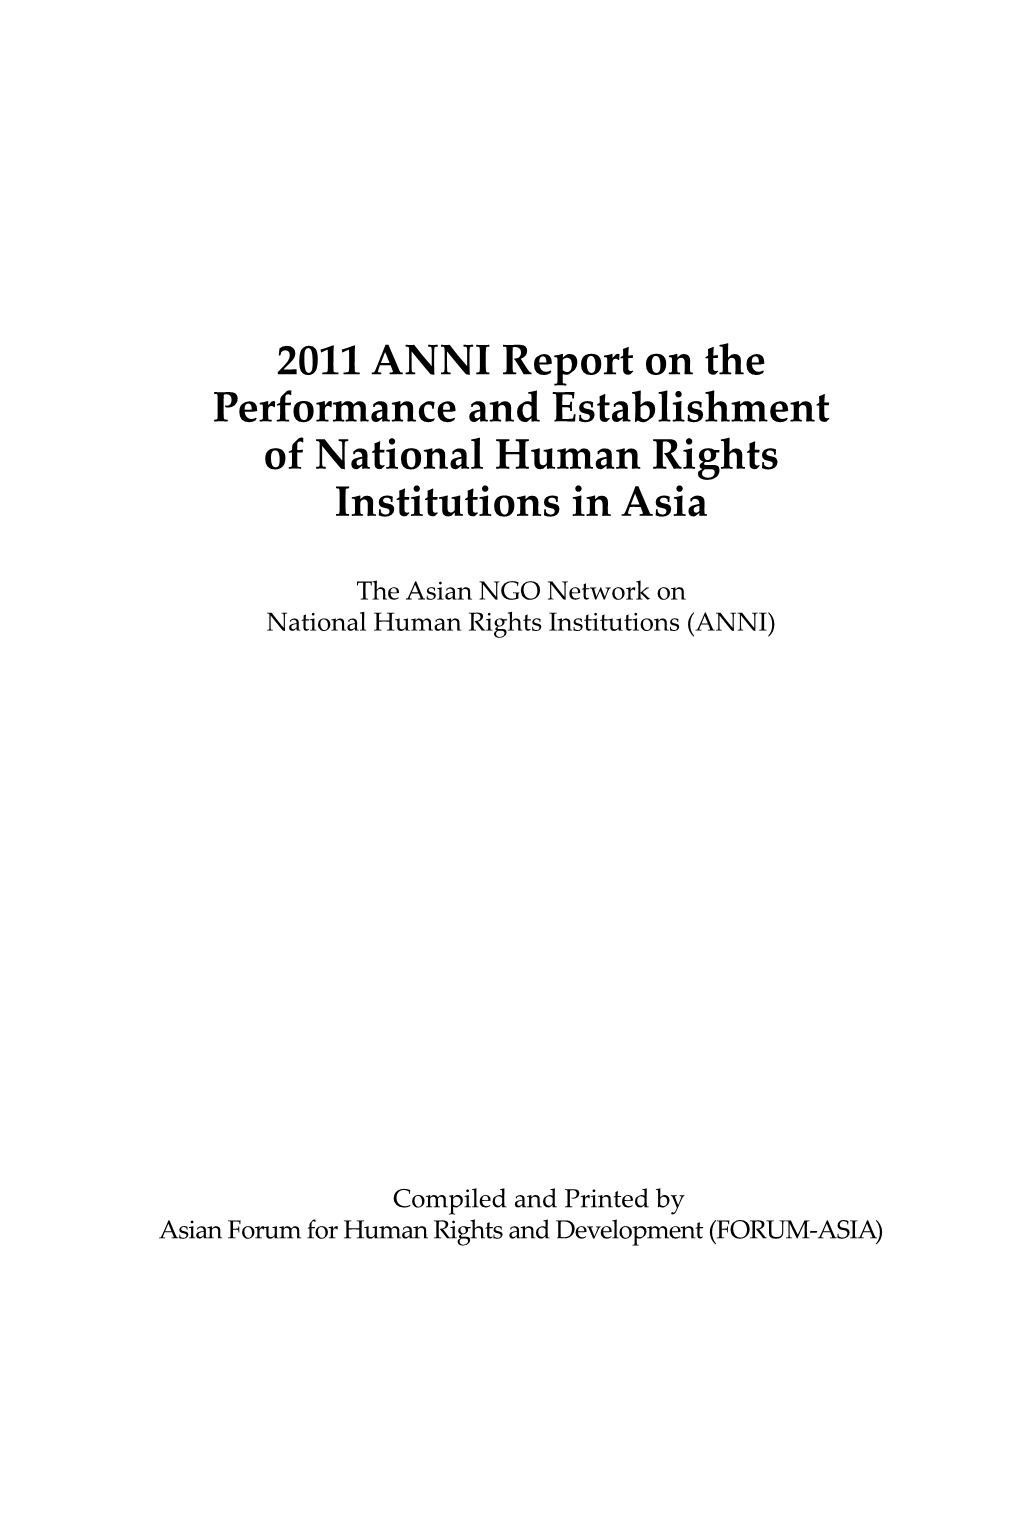 2011 ANNI Report on the Performance and Establishment of National Human Rights Institutions in Asia